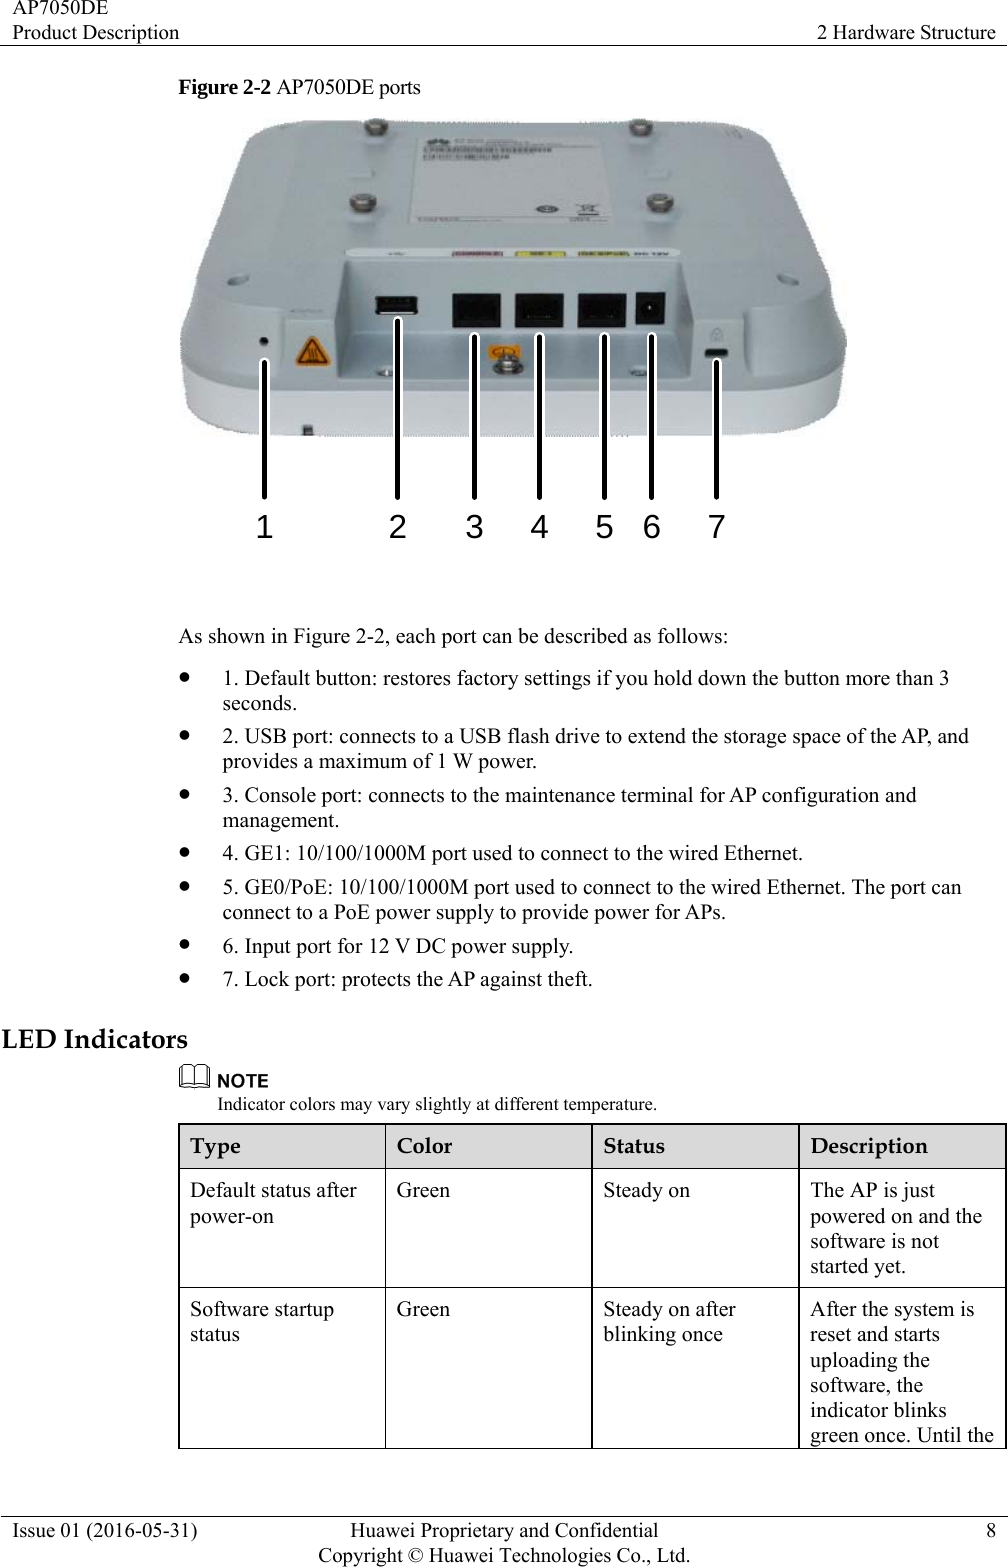 AP7050DE Product Description  2 Hardware Structure Issue 01 (2016-05-31)  Huawei Proprietary and Confidential         Copyright © Huawei Technologies Co., Ltd.8 Figure 2-2 AP7050DE ports 2 3 4 5 61 7  As shown in Figure 2-2, each port can be described as follows:  1. Default button: restores factory settings if you hold down the button more than 3 seconds.  2. USB port: connects to a USB flash drive to extend the storage space of the AP, and provides a maximum of 1 W power.  3. Console port: connects to the maintenance terminal for AP configuration and management.  4. GE1: 10/100/1000M port used to connect to the wired Ethernet.  5. GE0/PoE: 10/100/1000M port used to connect to the wired Ethernet. The port can connect to a PoE power supply to provide power for APs.  6. Input port for 12 V DC power supply.  7. Lock port: protects the AP against theft. LED Indicators  Indicator colors may vary slightly at different temperature. Type  Color  Status  Description Default status after power-on Green  Steady on  The AP is just powered on and the software is not started yet. Software startup status Green Steady on after blinking once After the system is reset and starts uploading the software, the indicator blinks green once. Until the 